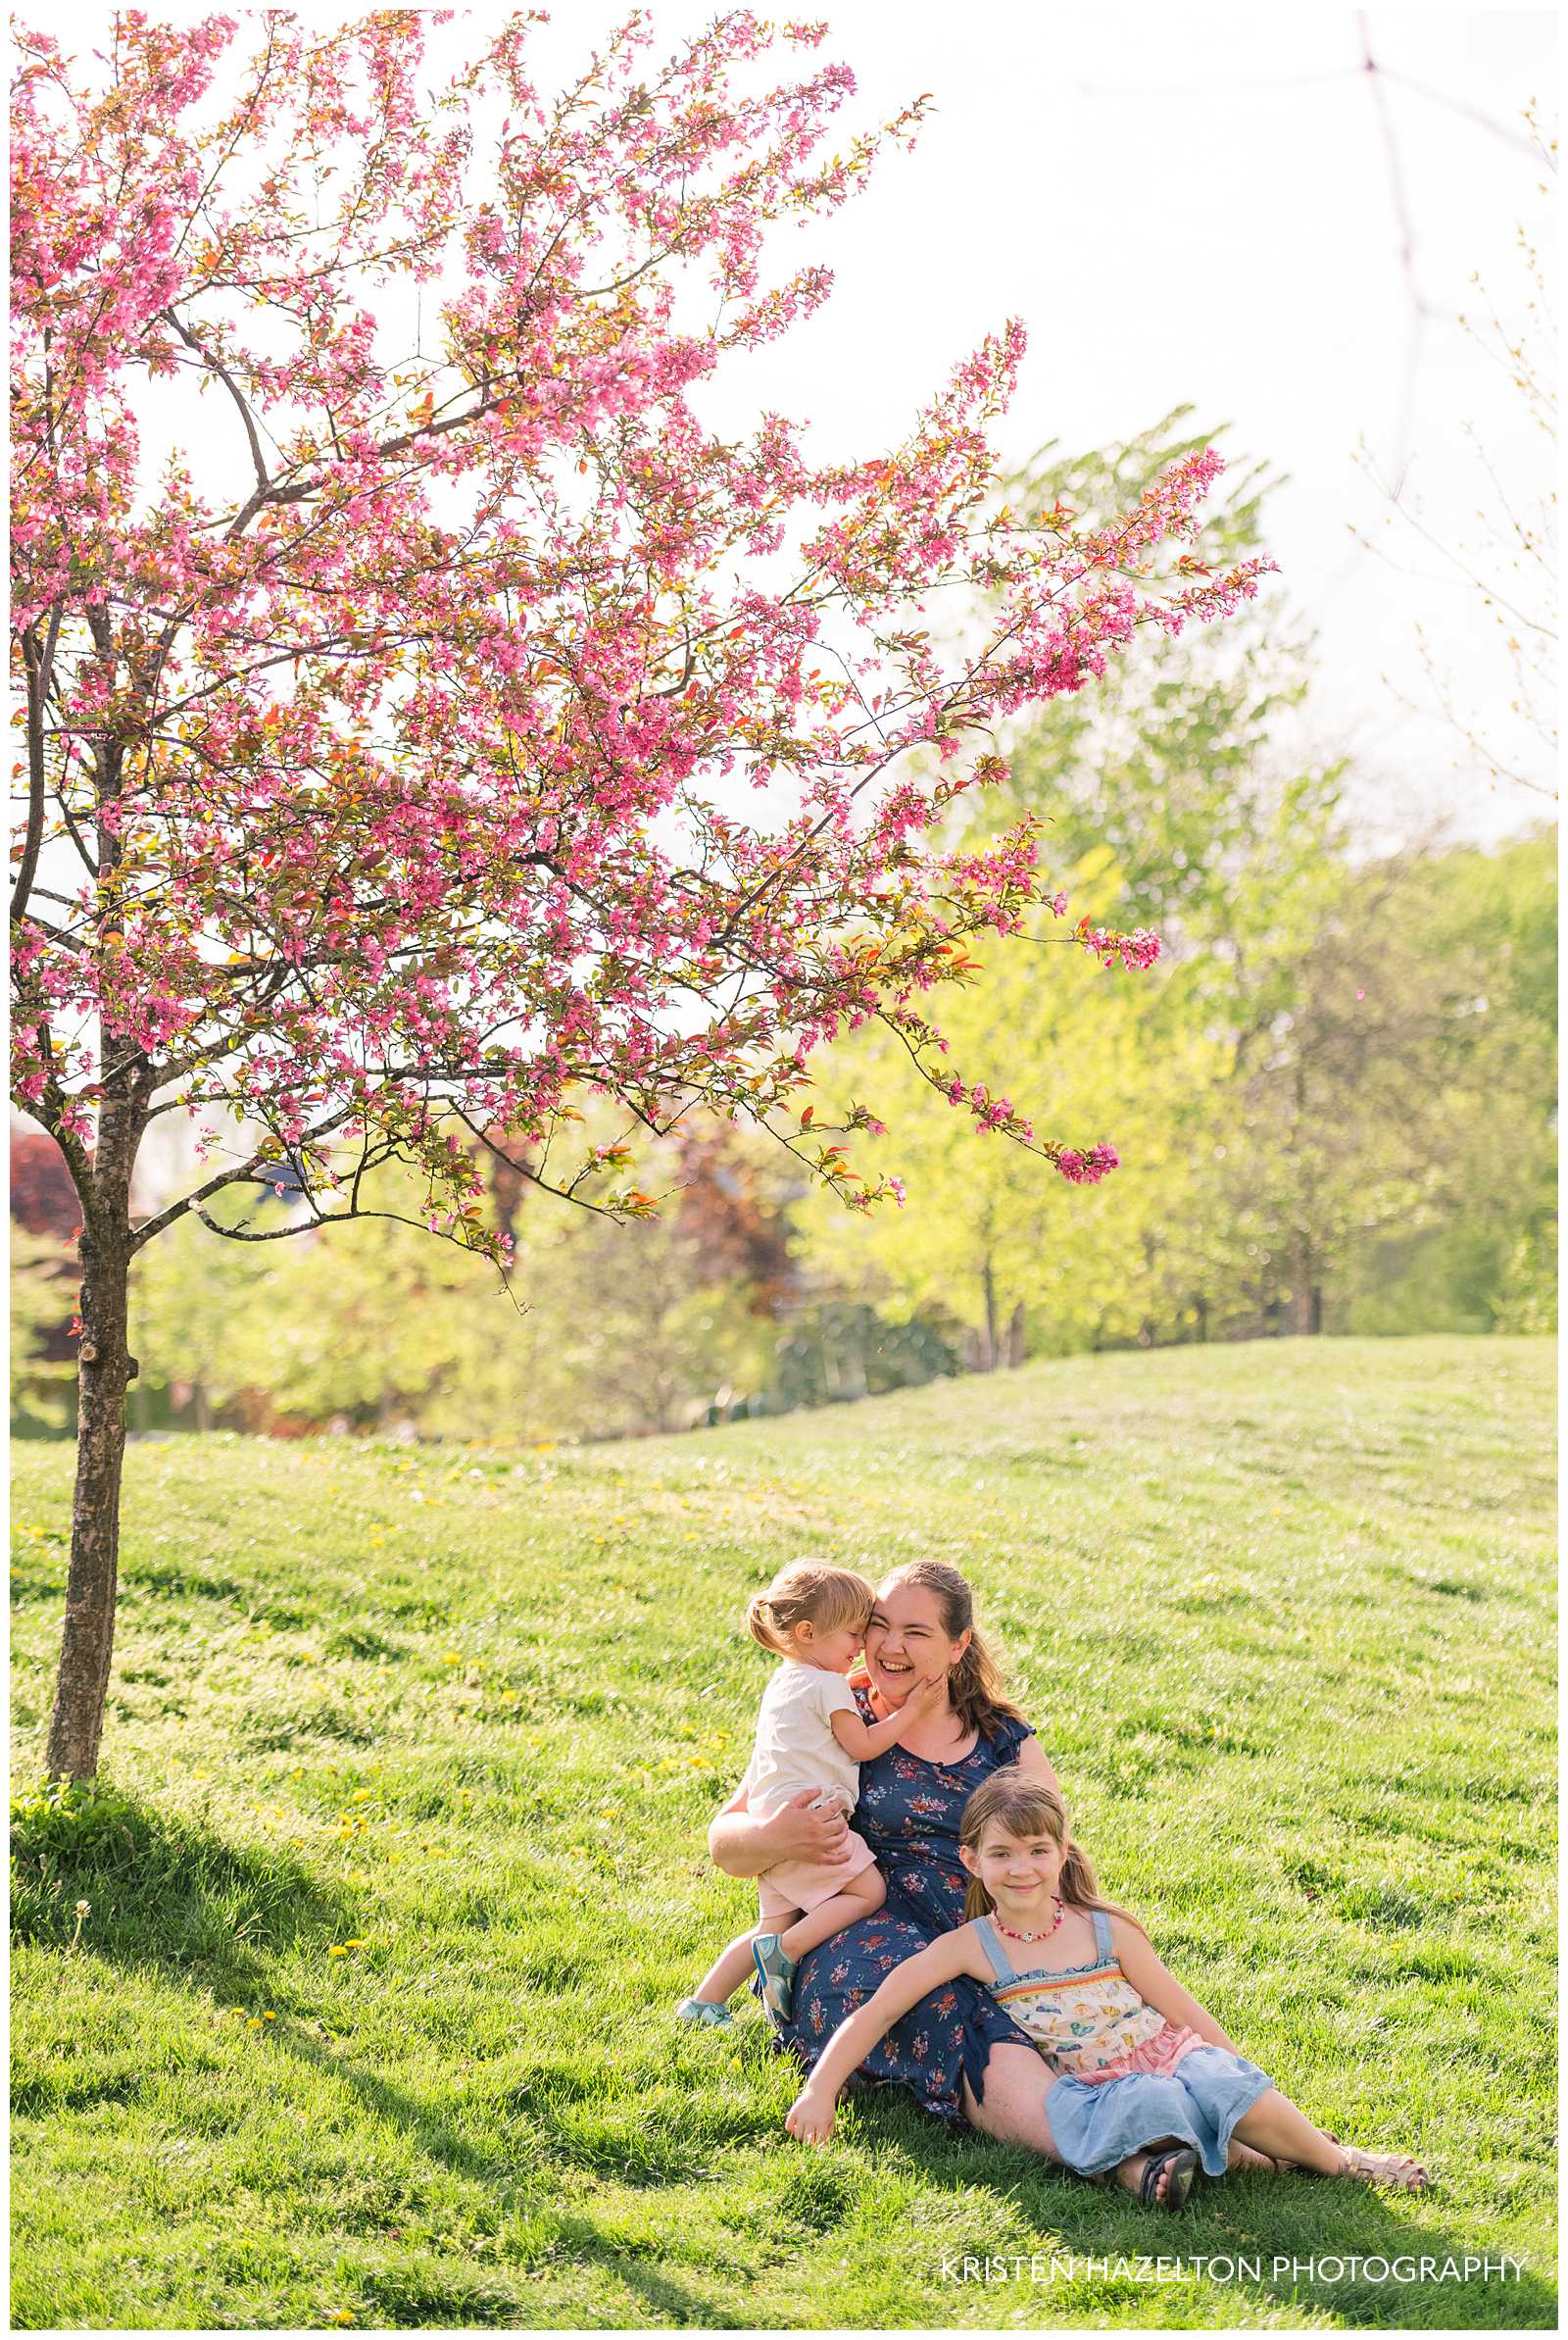 Euclid Square Park family photos of a mother and her two daughters under the pink crabapple blossoms